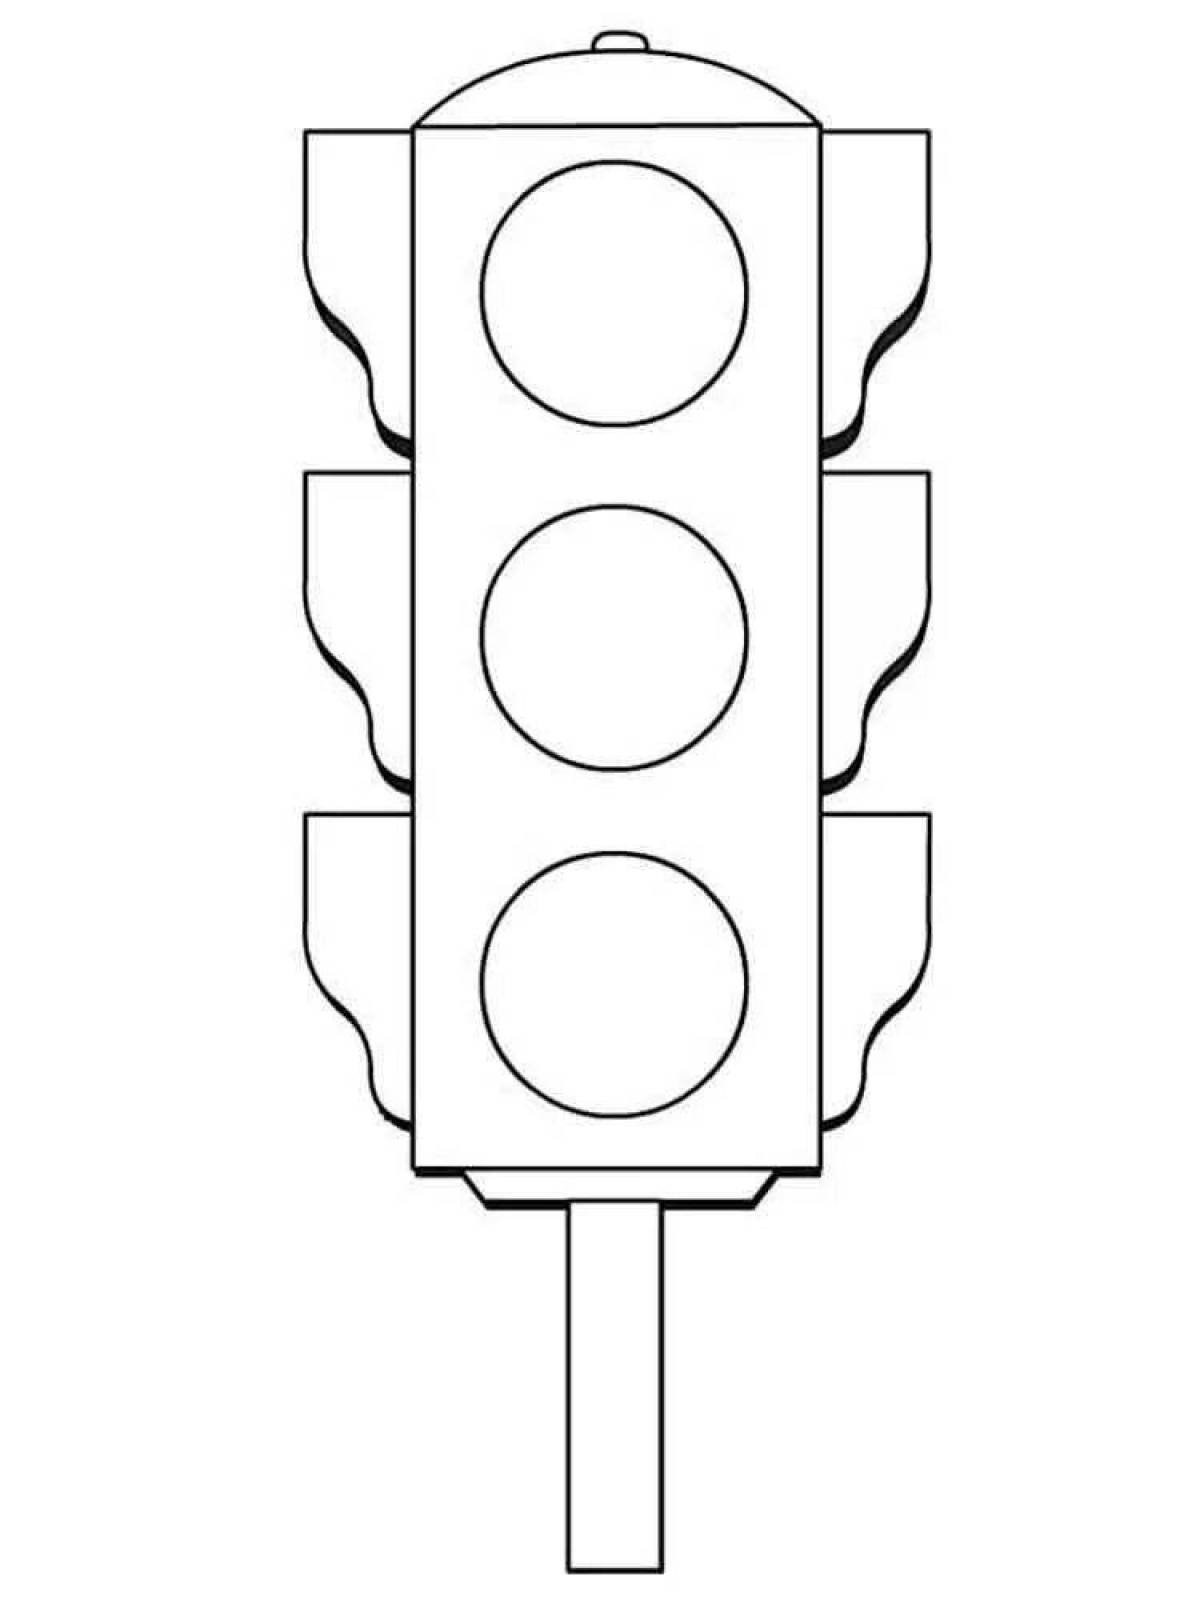 Bright traffic light coloring page for 5-6 year olds